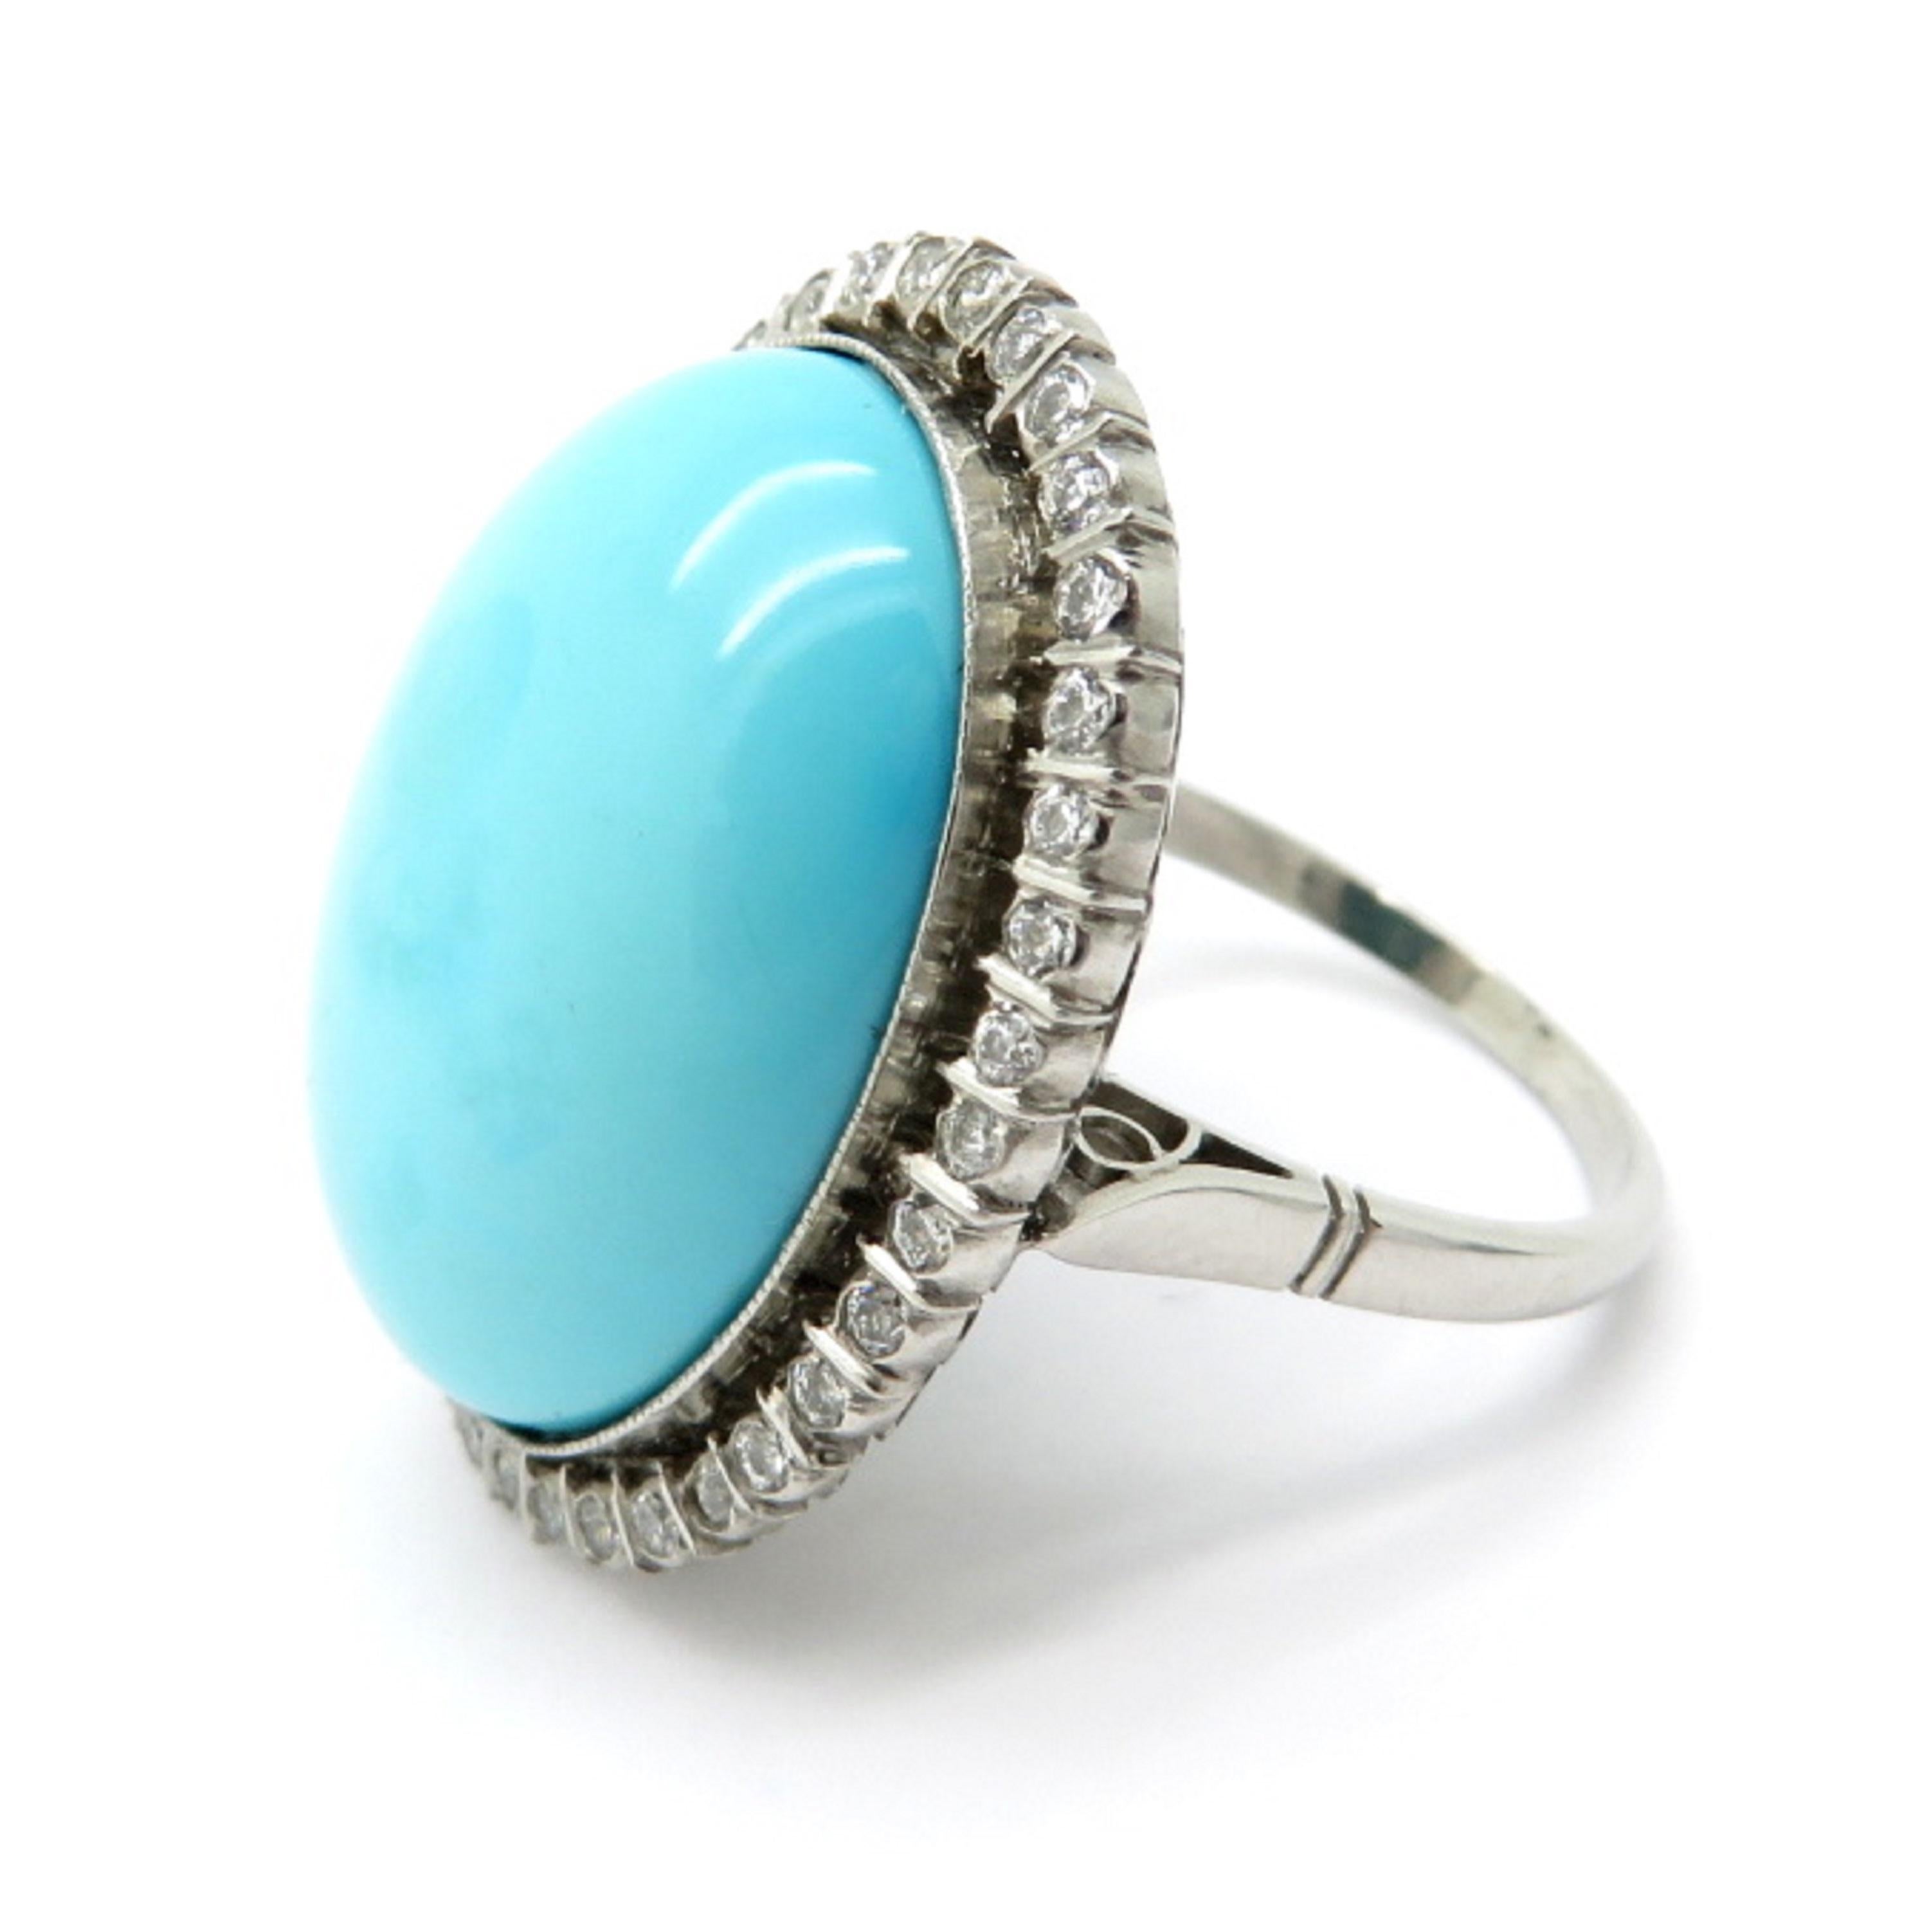 Platinum Persian turquoise and diamond halo fashion ring. Centering one fine quality oval Persian turquoise cabochon weighing approximately 14.90 carats. Accented with 37 Old European cut bar set diamonds weighing a combined total of 0.45 carats.